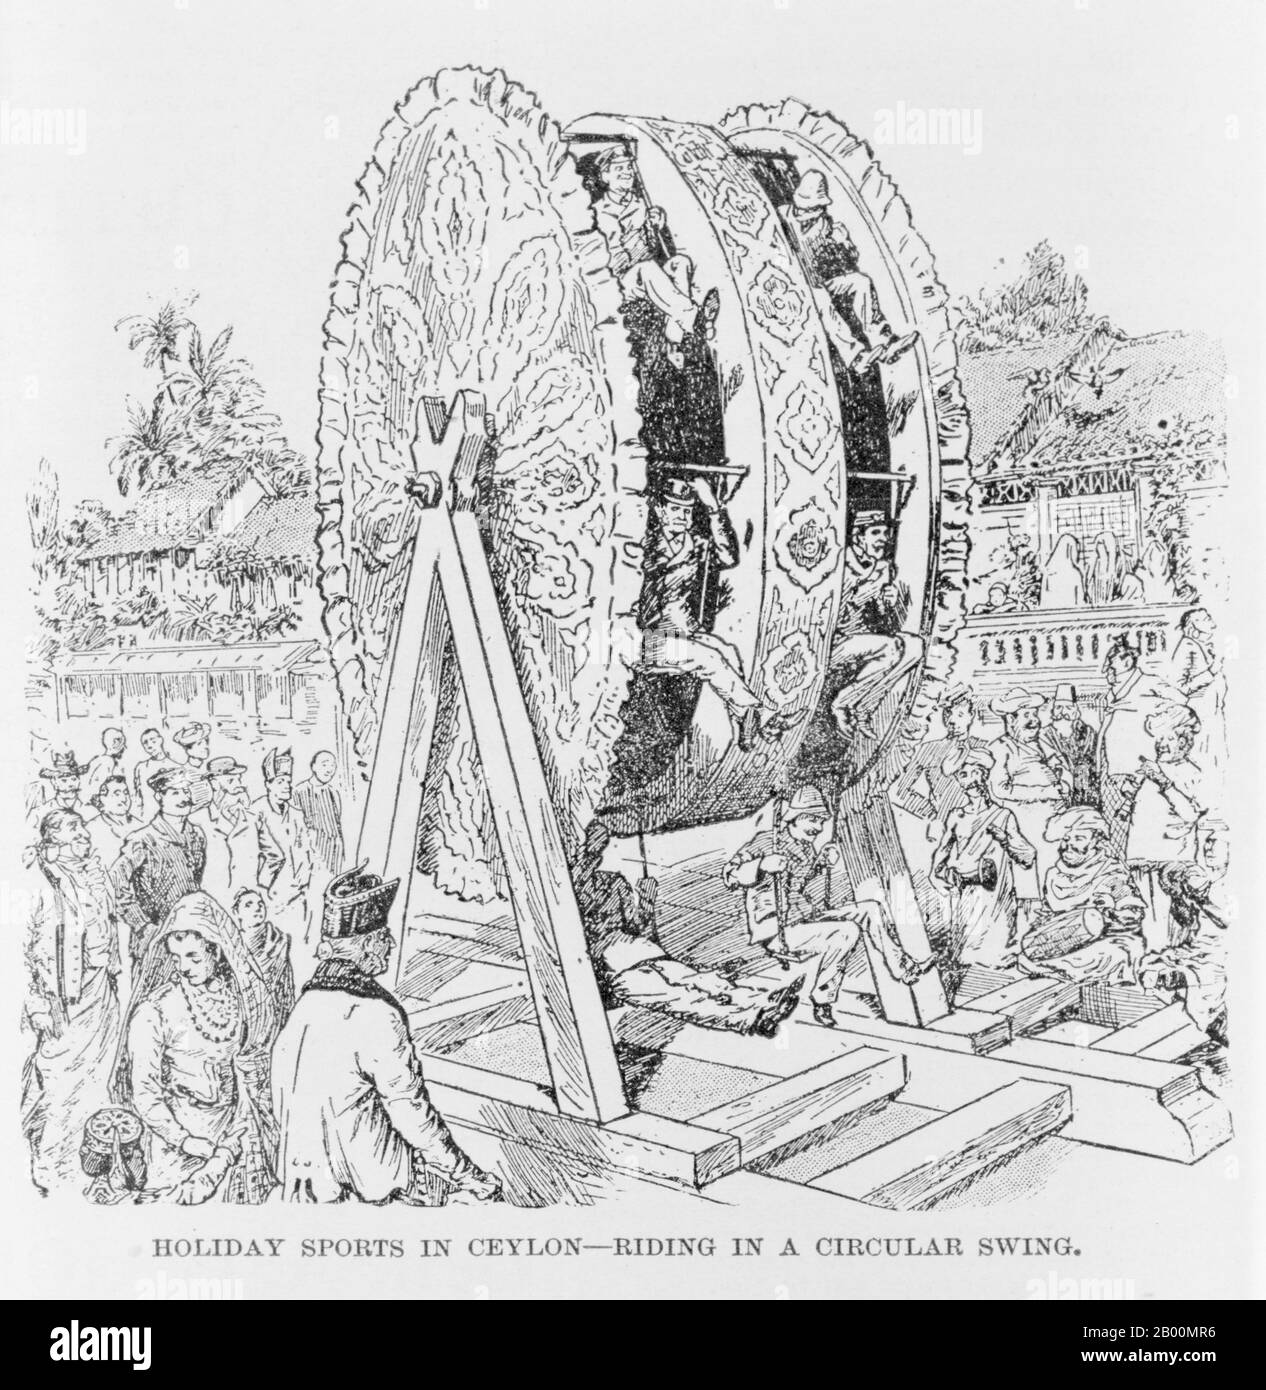 Sri Lanka: Holiday Sports in Ceylon, riding in a circular wheel, 1893.  An early Ferris Wheel in colonial Ceylon, portrayed not long after the 1893 Chicago World Fair where Ceylon was represented. The original Ferris Wheel was designed and constructed by George Washington Gale Ferris, Jr. as a landmark for the 1893 World's Columbian Exposition in Chicago. The term Ferris wheel later came to be used generically for all such structures. Since the original 1893 Chicago Ferris Wheel, there have been eight subsequent world's tallest-ever Ferris wheels. Stock Photo